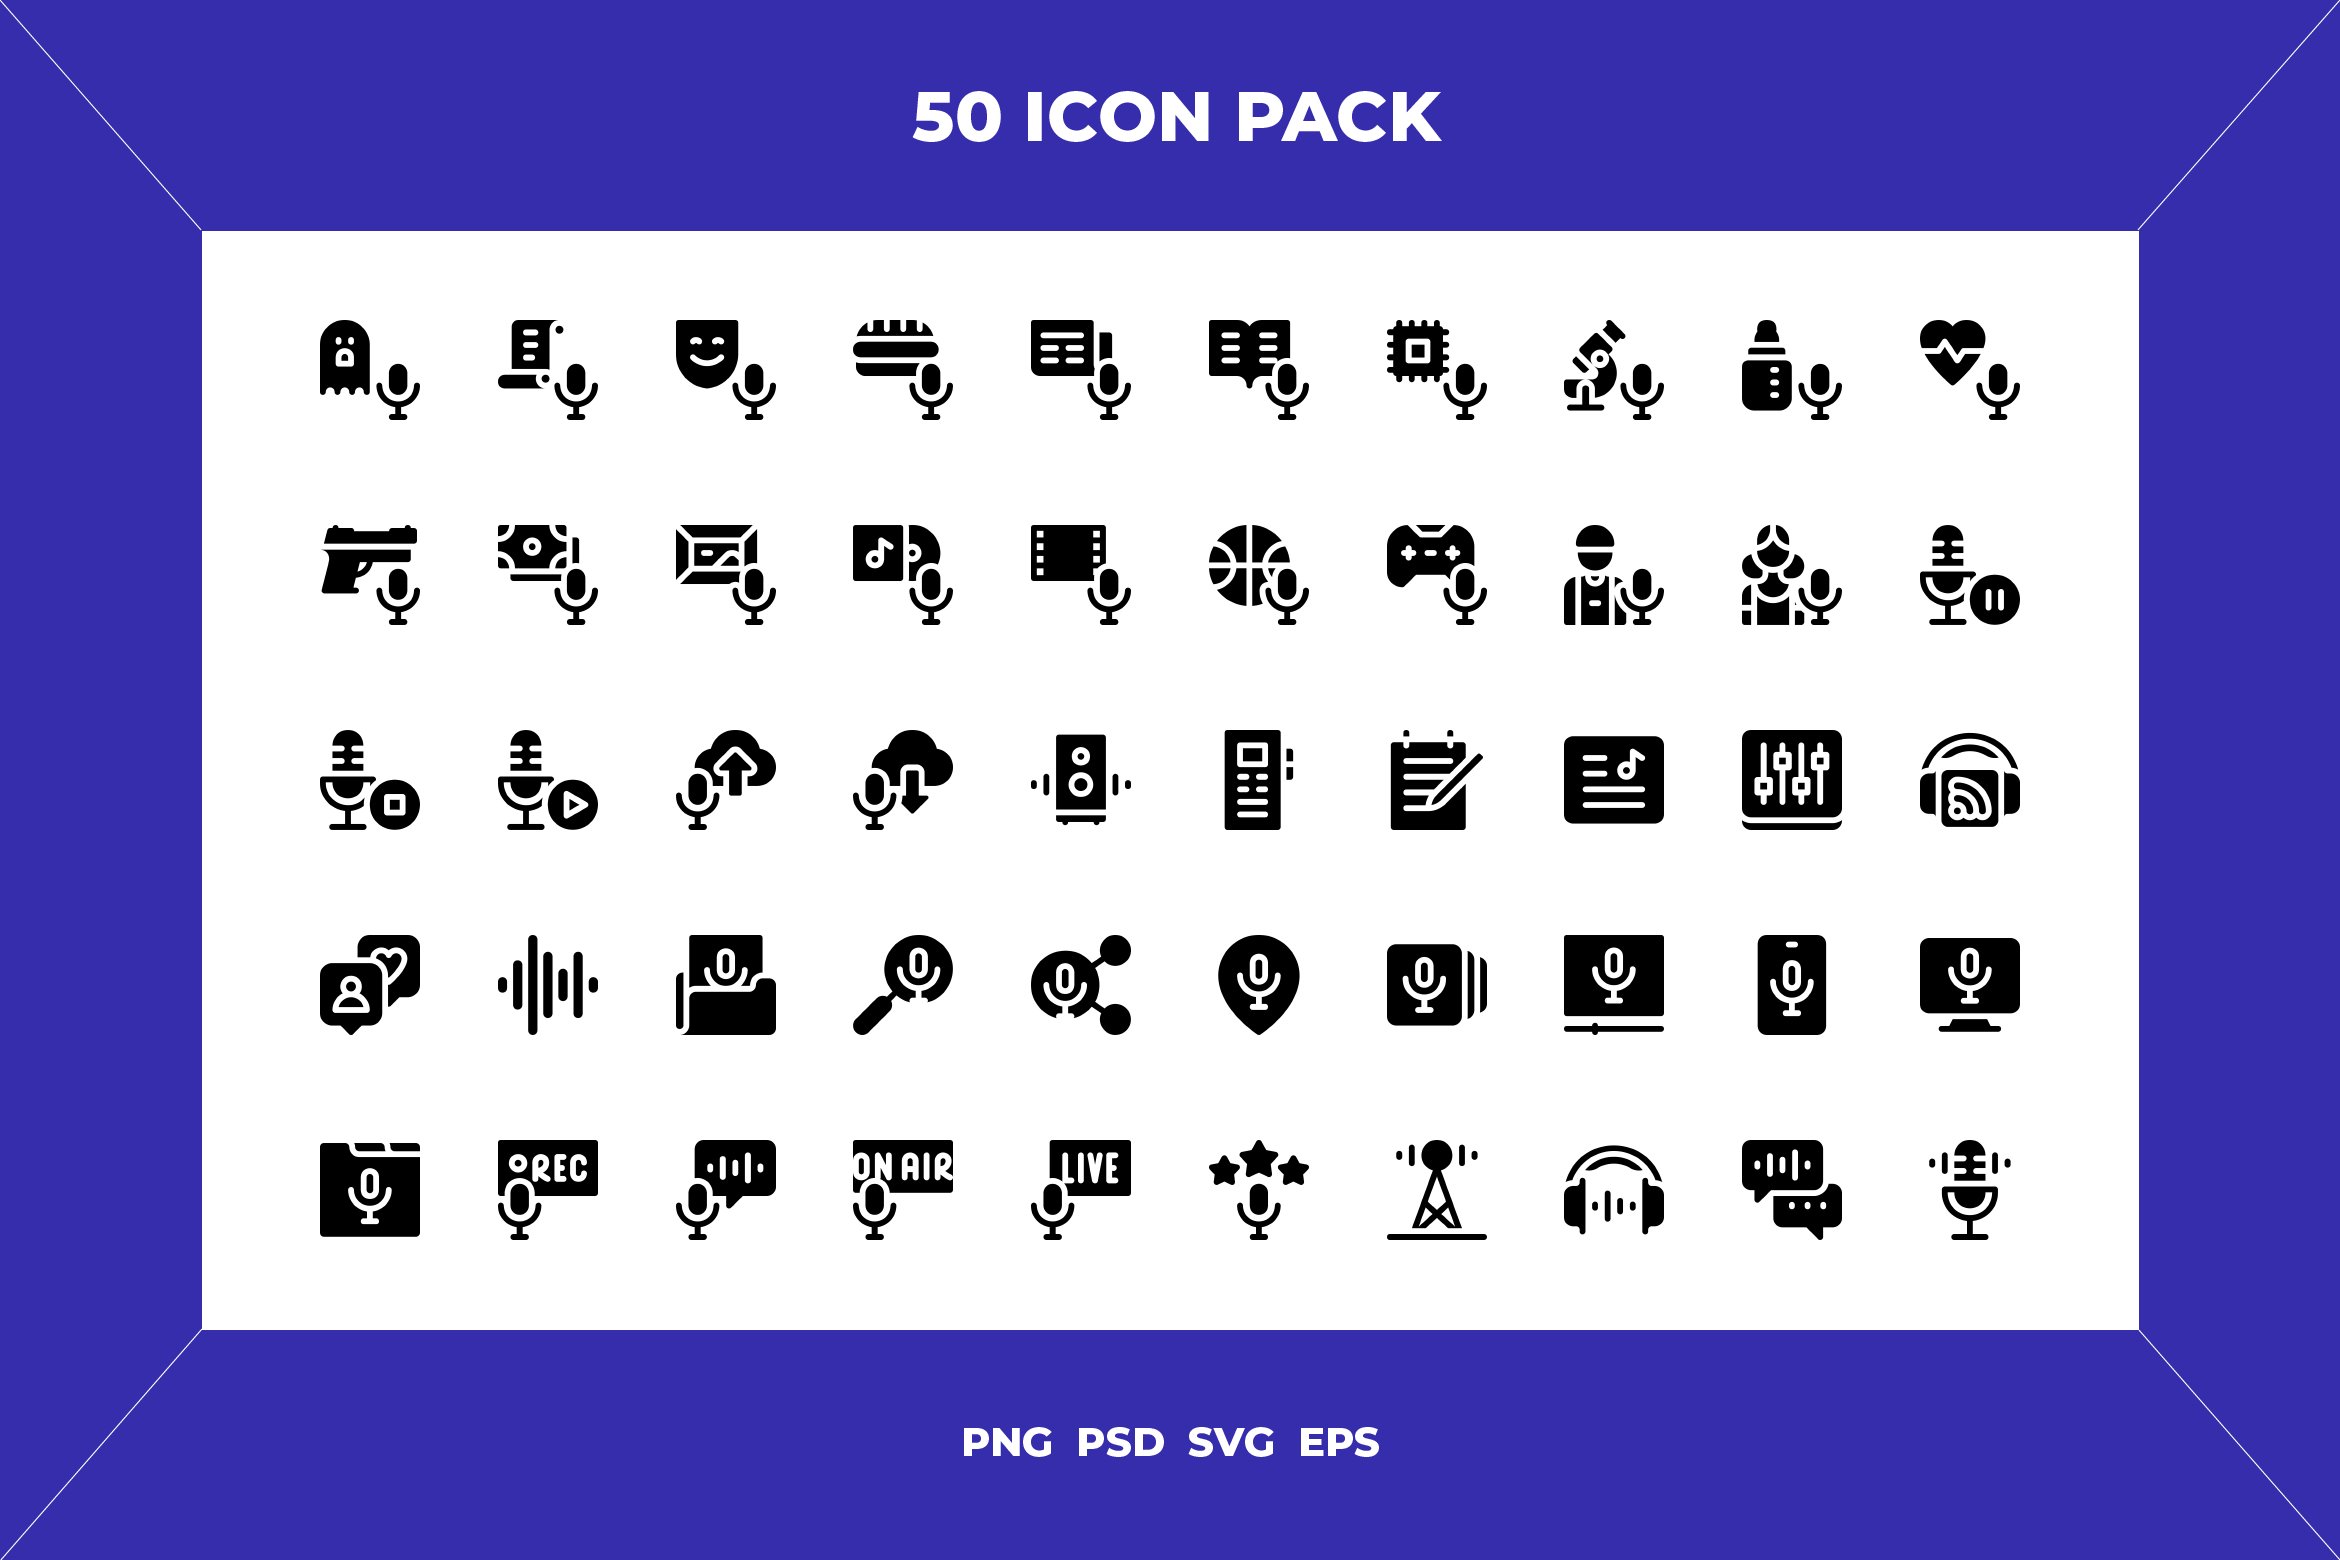 Podcast icons cover image.